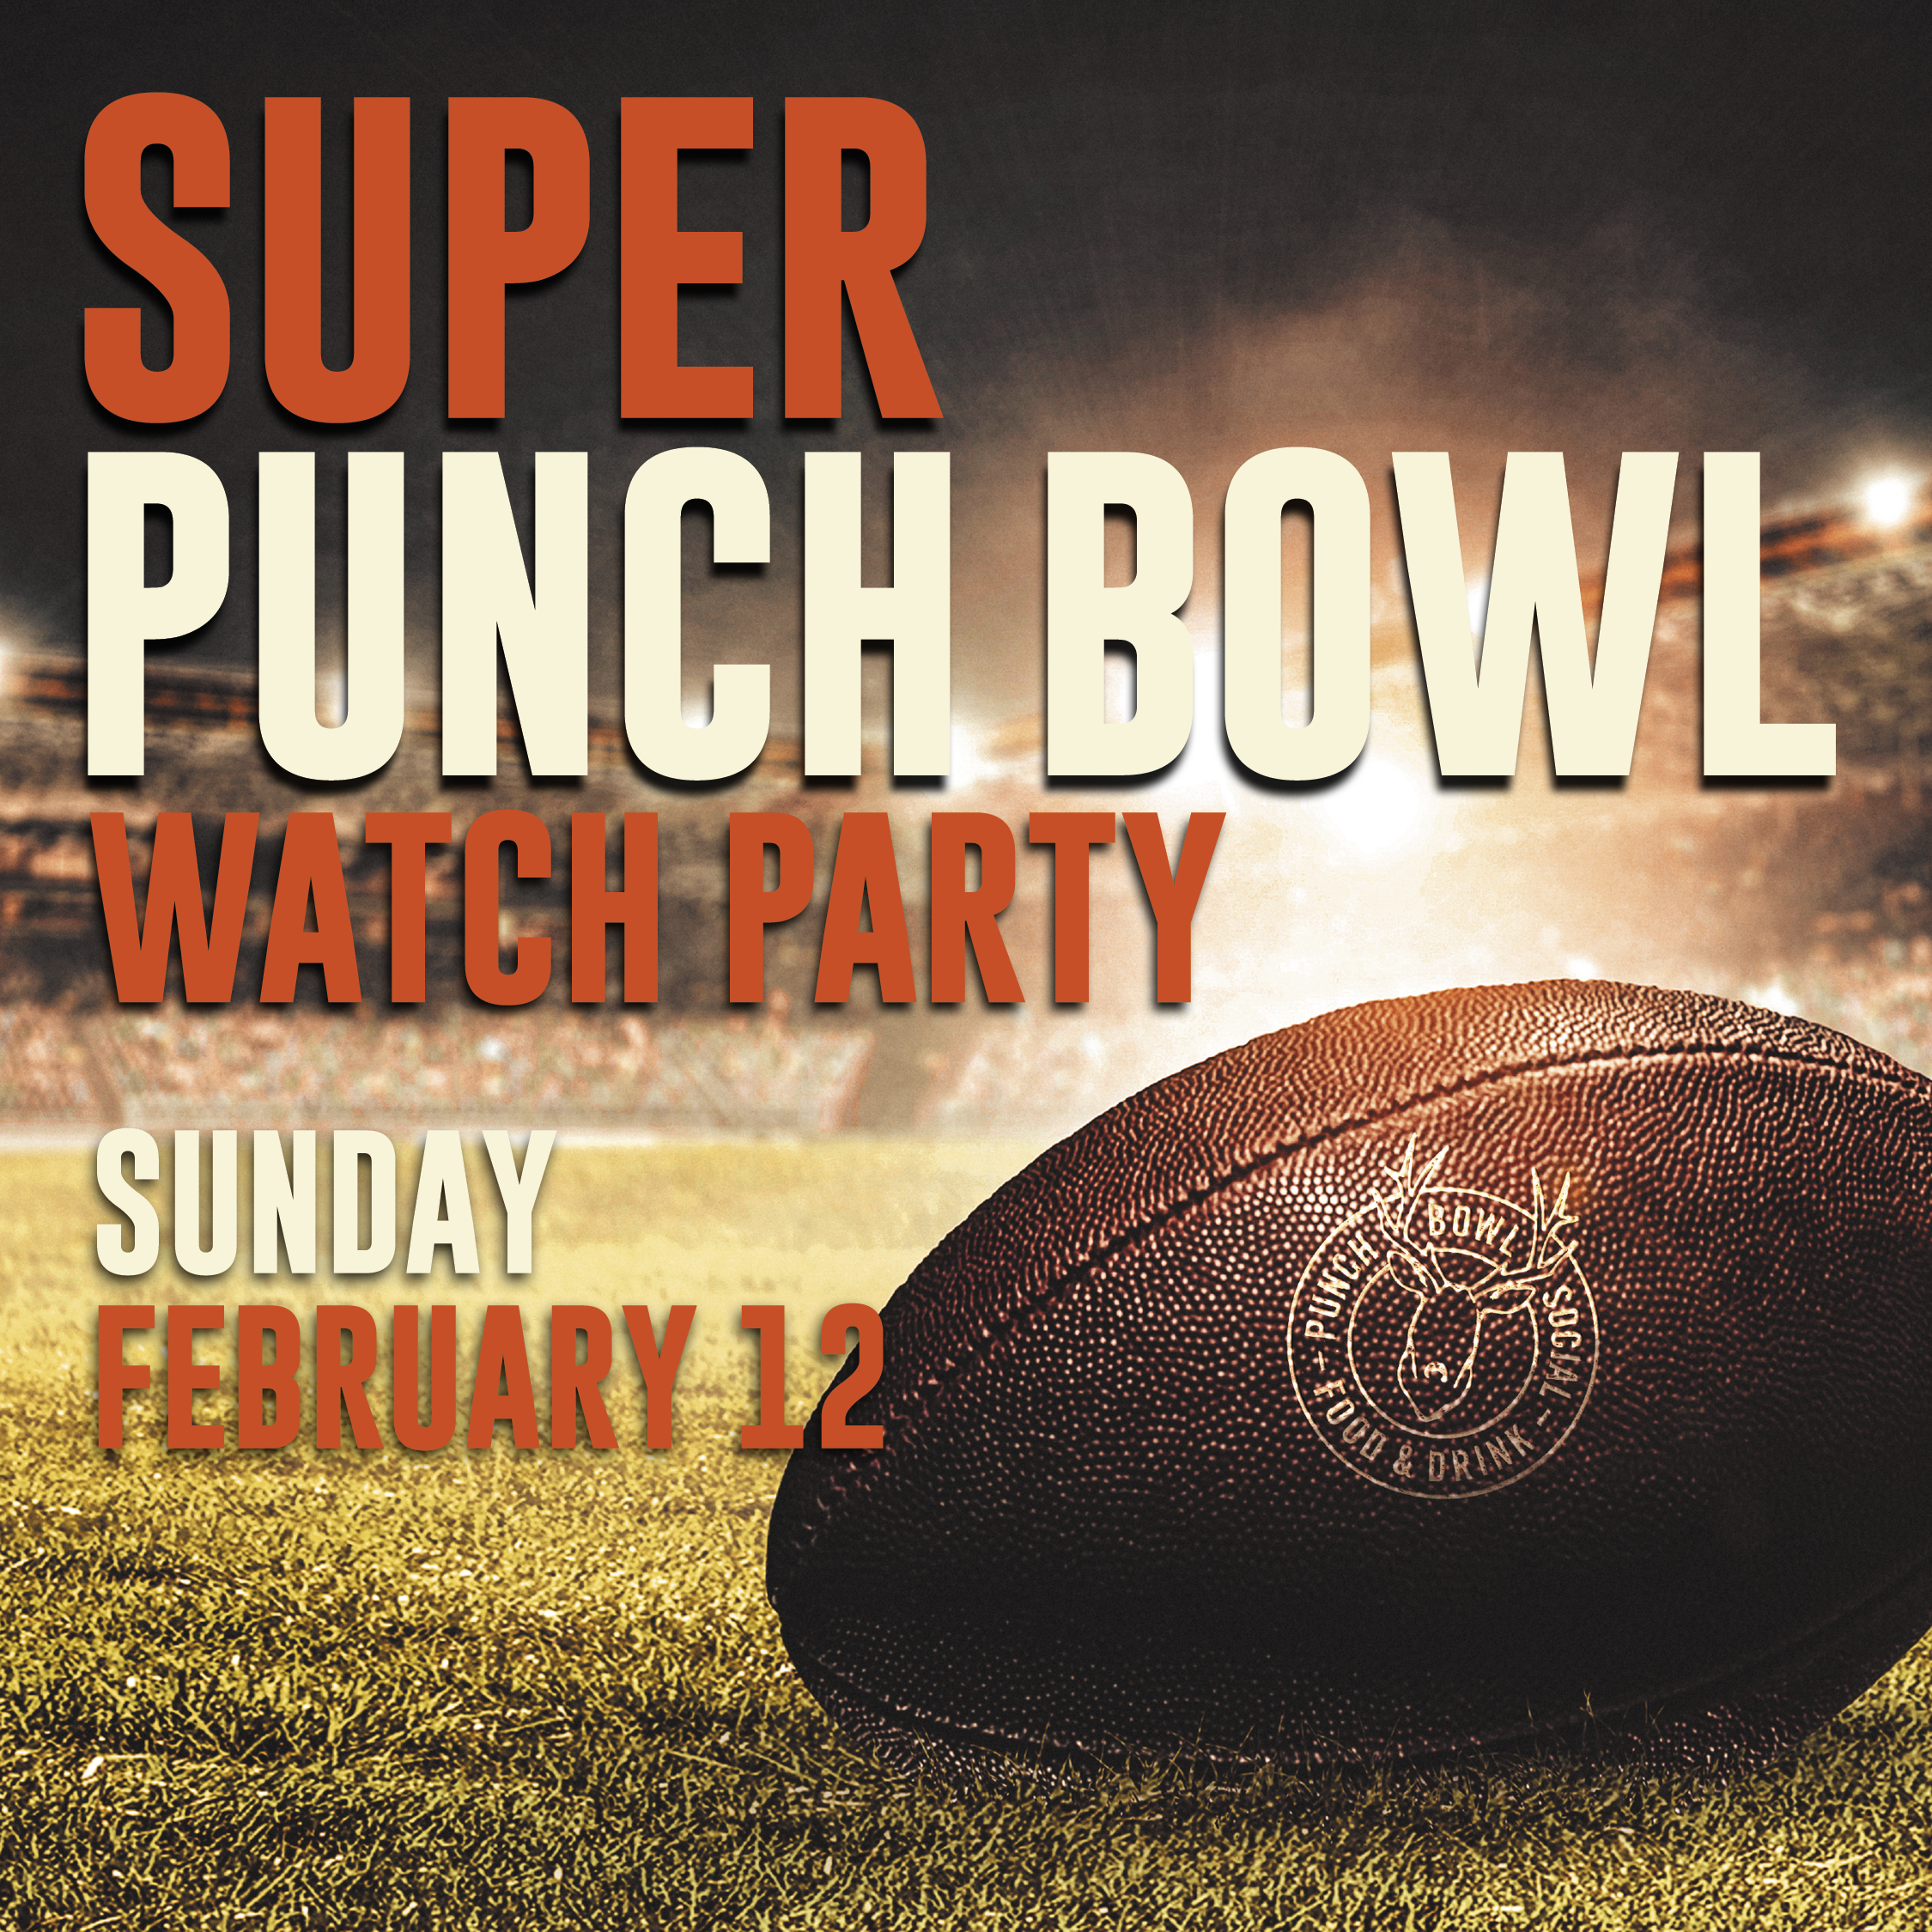 Super Bowl Watch Party from Punch Bowl Social